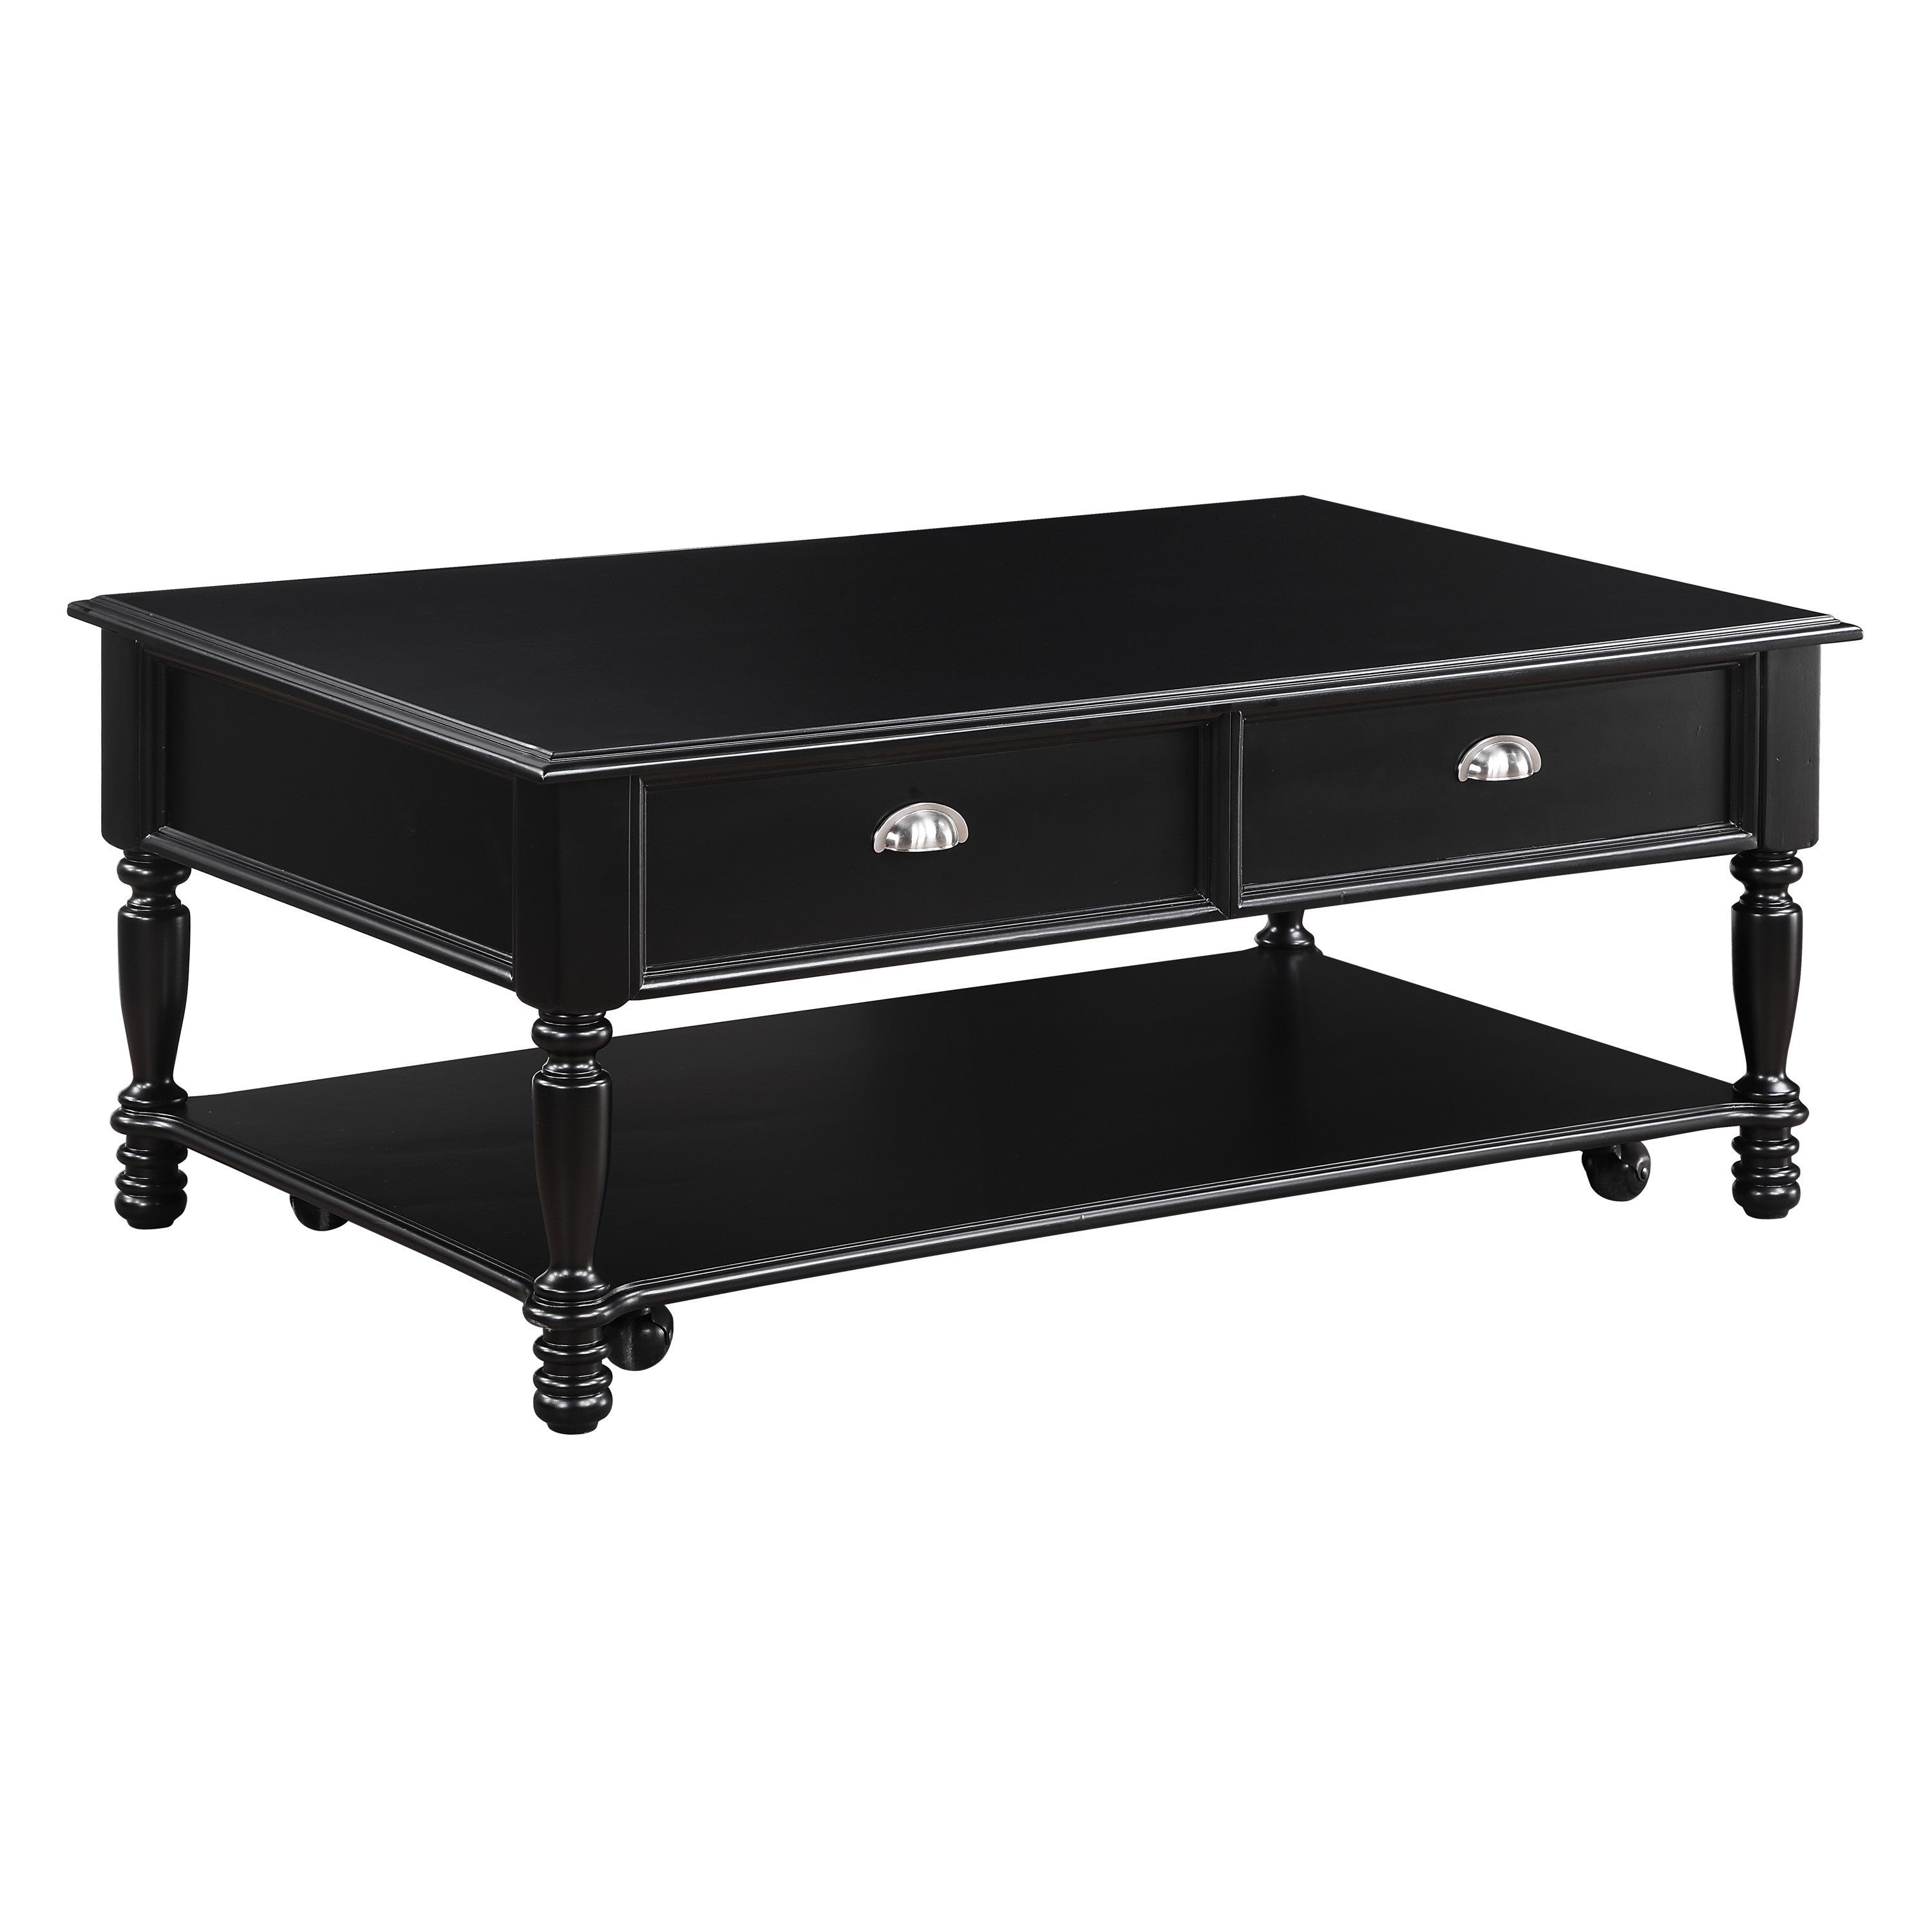 Classic Design Black Finish Lift Top Cocktail Table with Casters Bottom Shelf Wooden